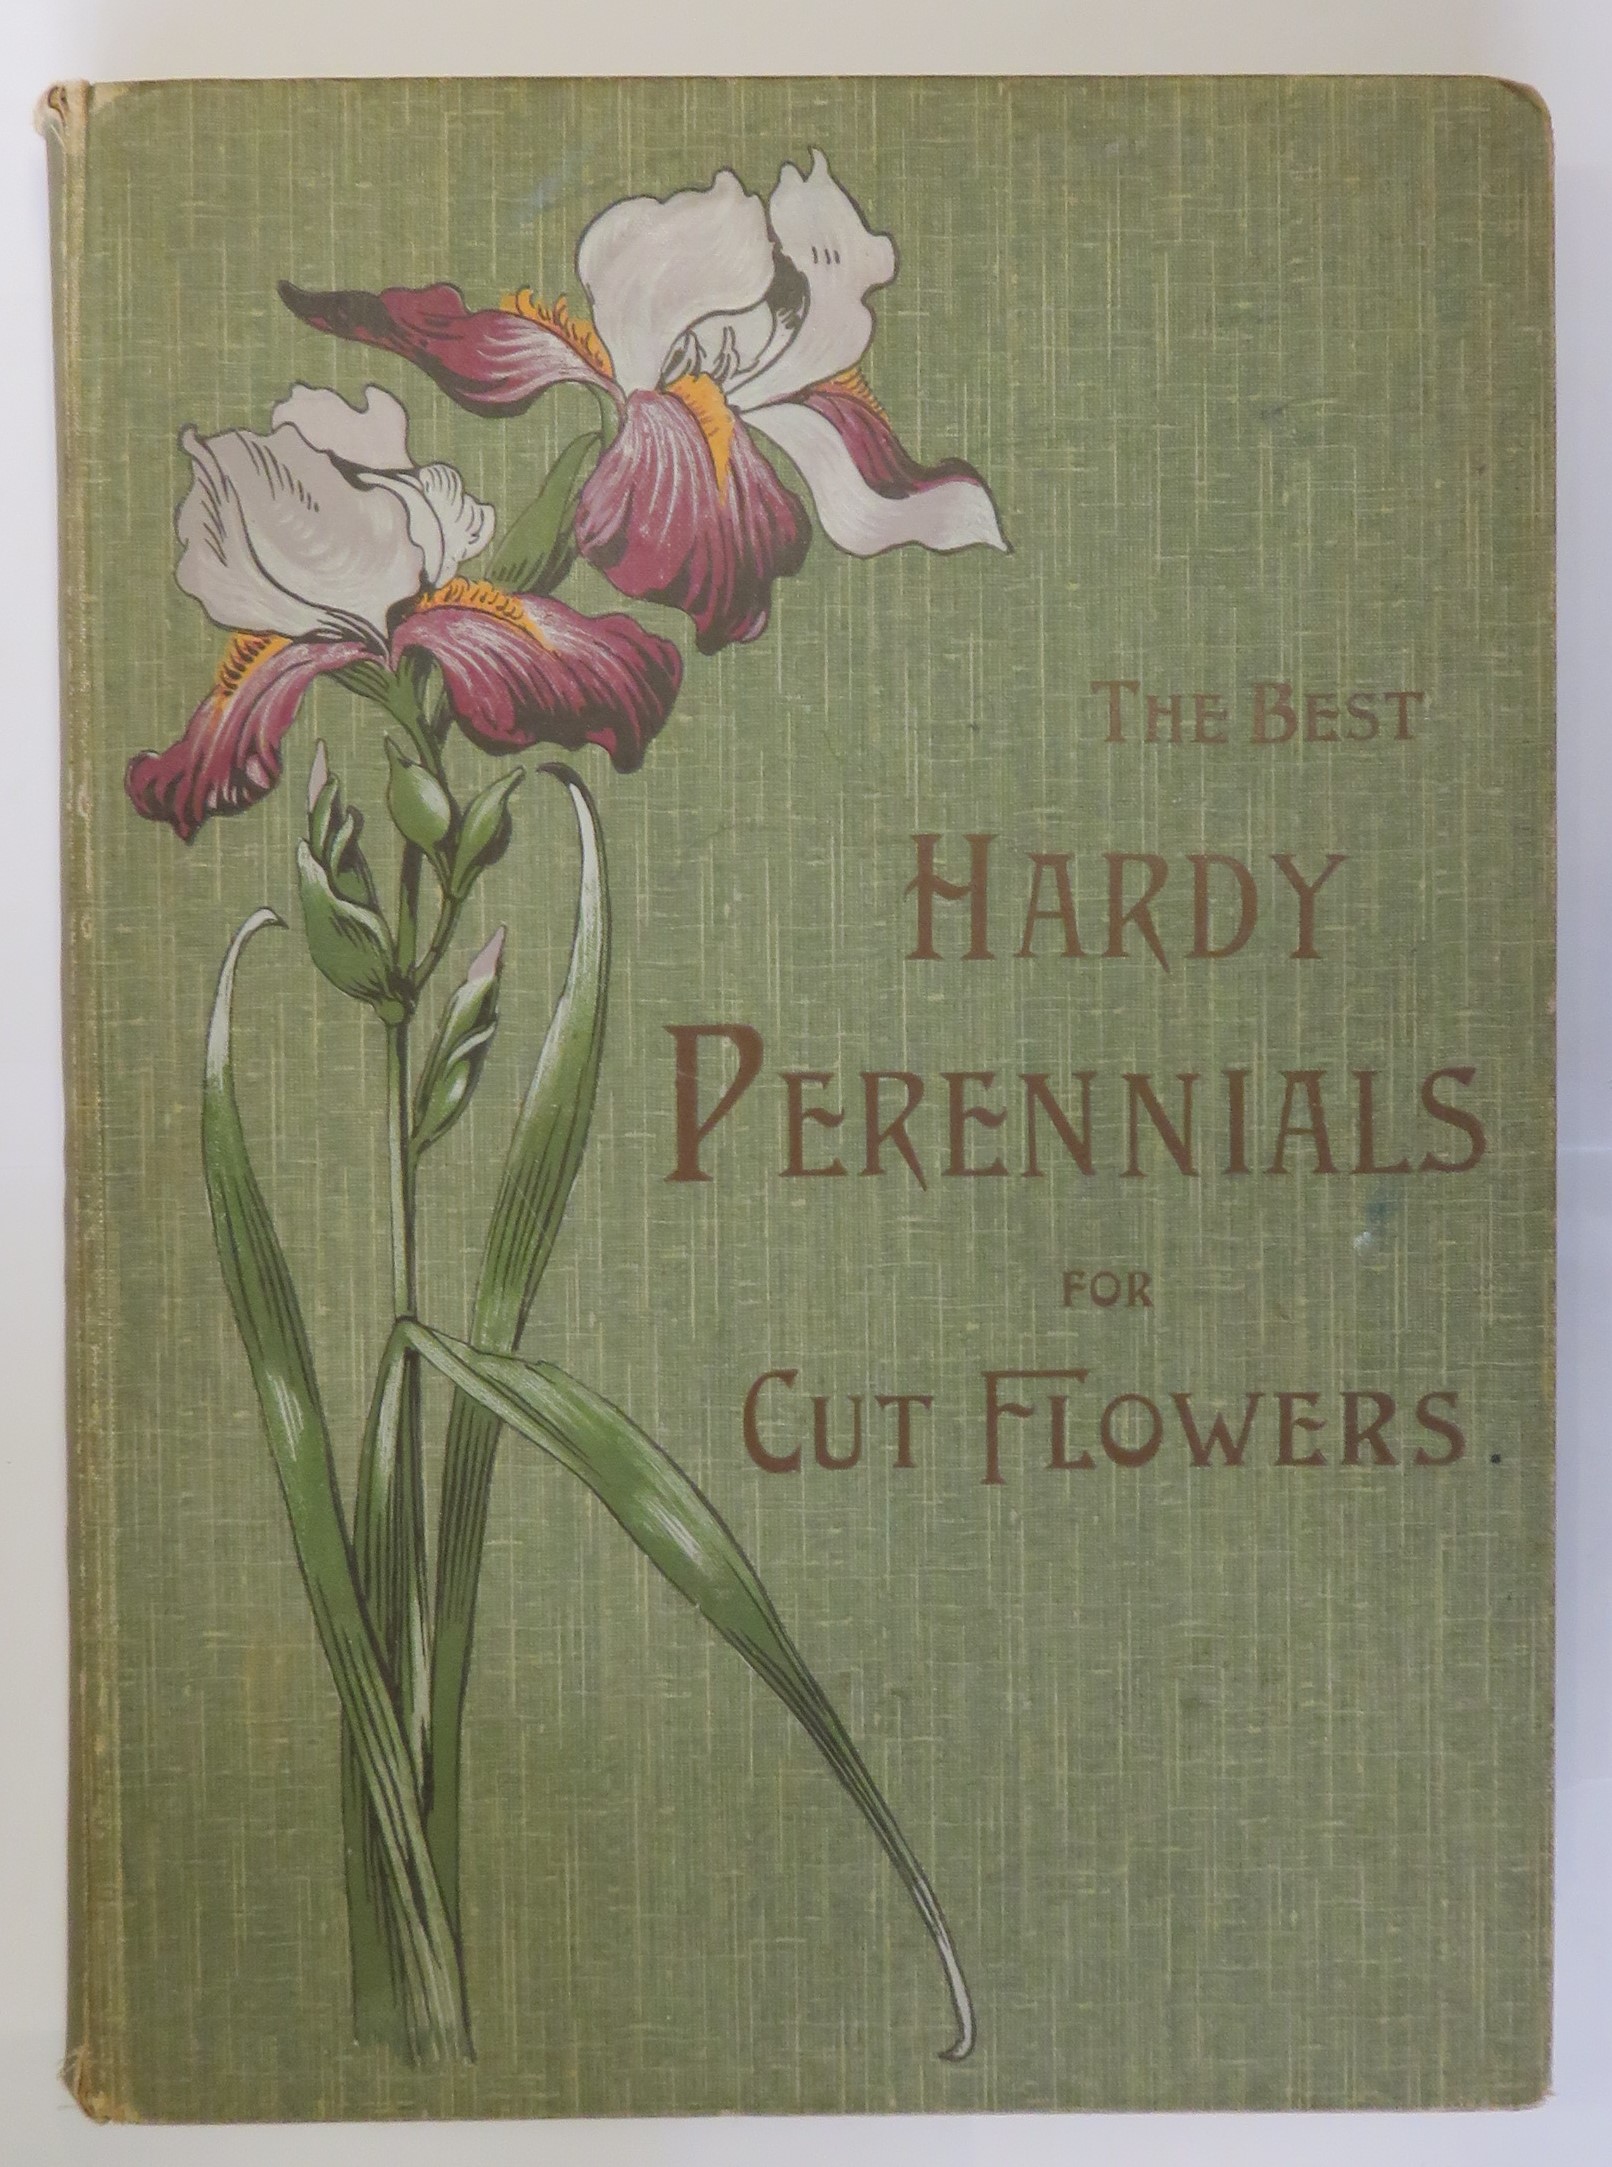 The Best Hardy Perennials For Producing An Abundant Supply of Cut Flowers